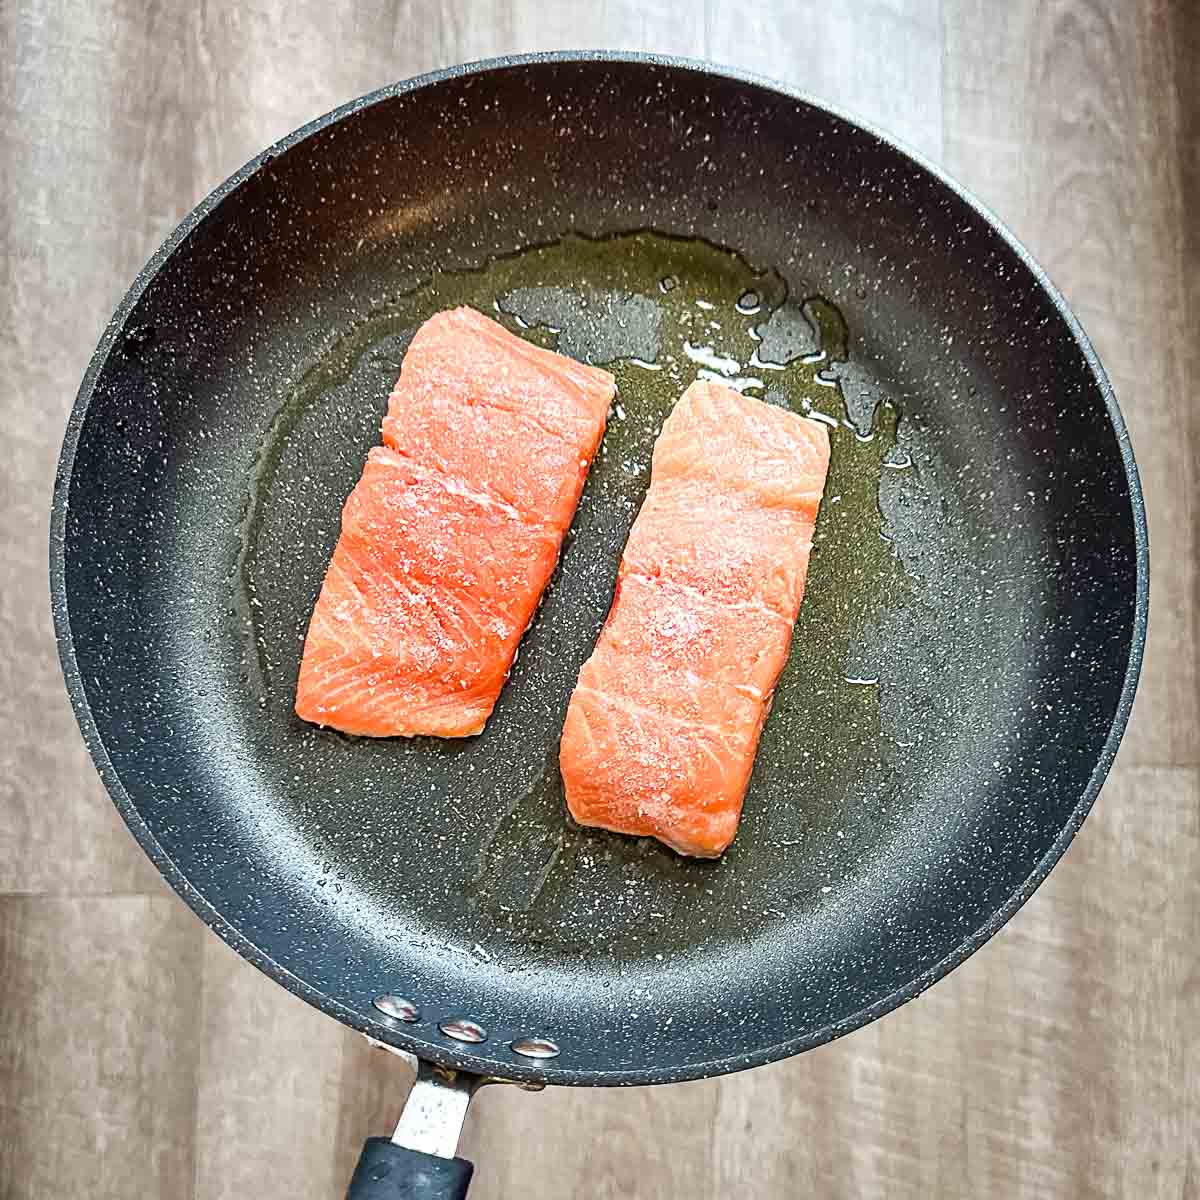 Two skin-side down salmon fillets cooking in a frying pan.